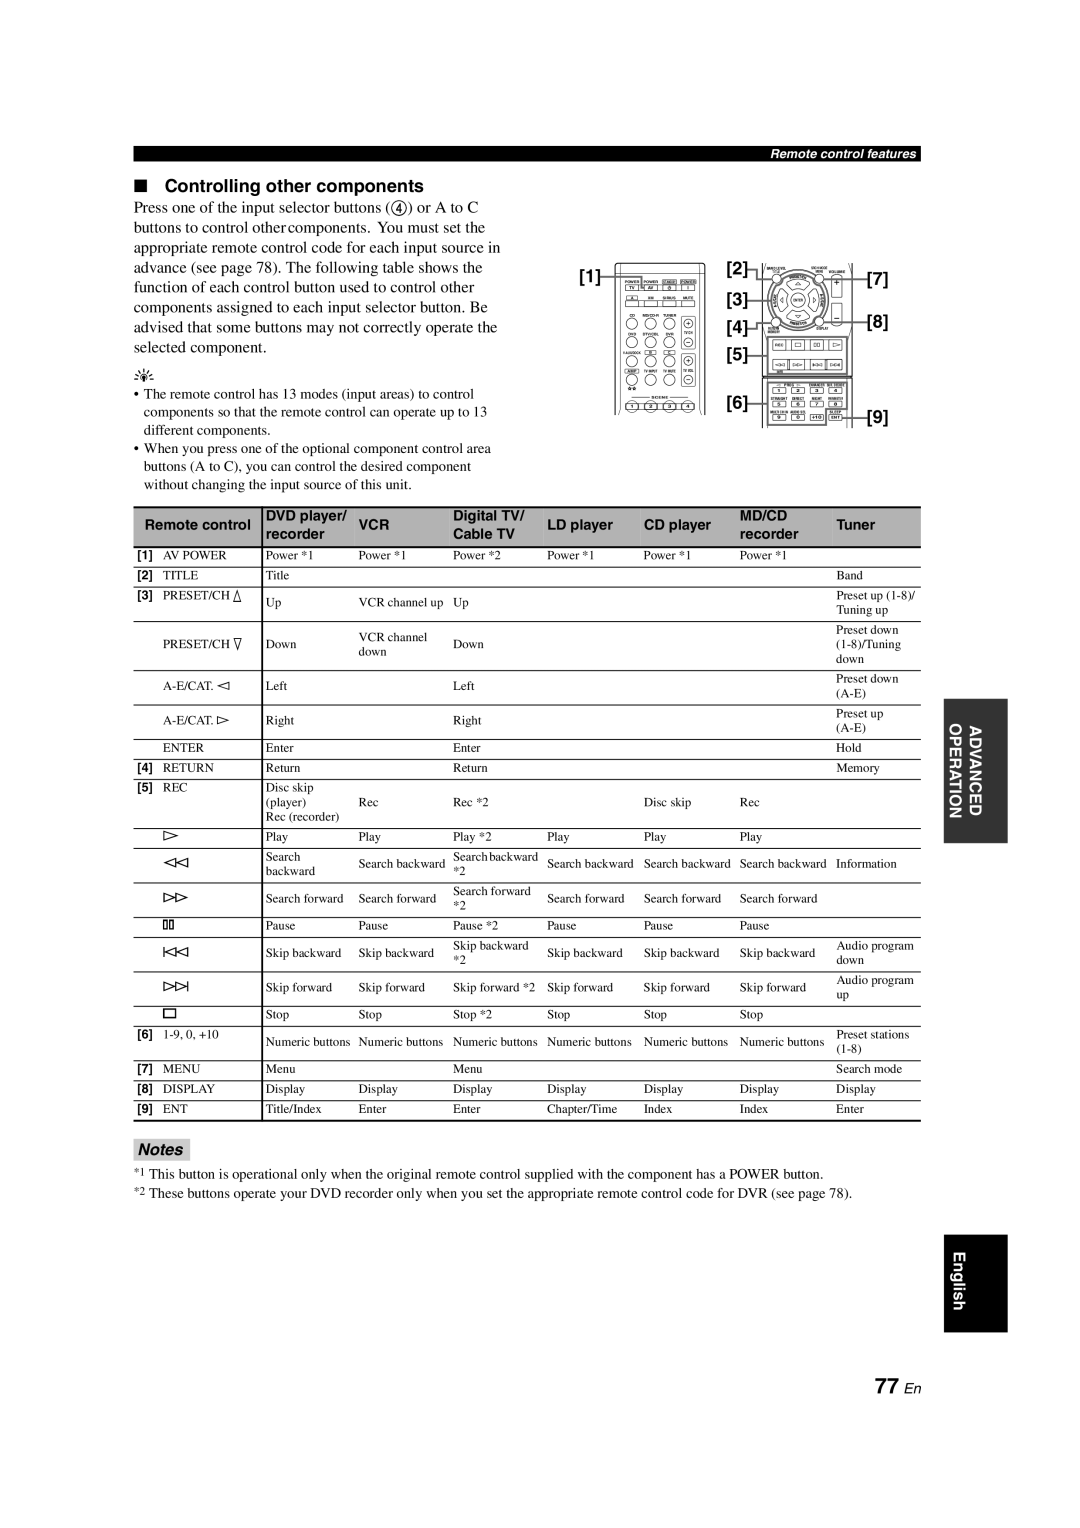 Yamaha RX-V563 owner manual 77 En, Controlling other components, Press one of the input selector buttons 4 or A to C 